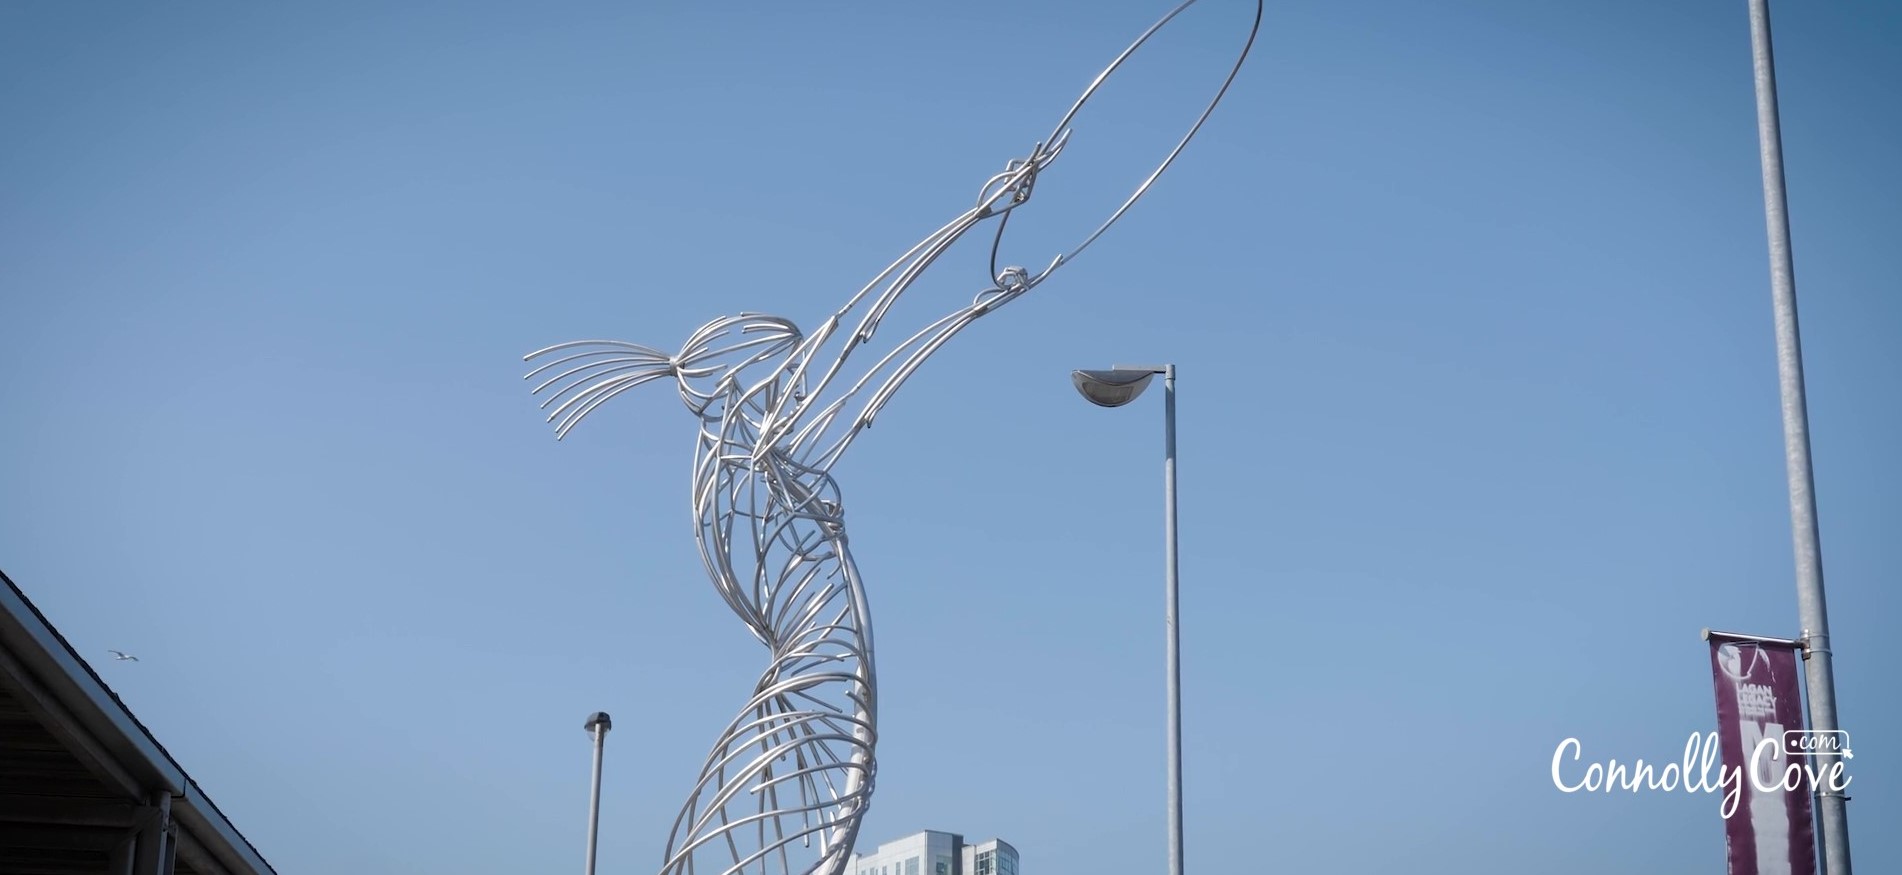 beacon of hope Check out our ultimate guide to things to do in Belfast, we have made note of all the best attractions that you need to visit while on your visit to Belfast, Northern Ireland. So much to see and do you won't be bored in Belfast we can promise that!